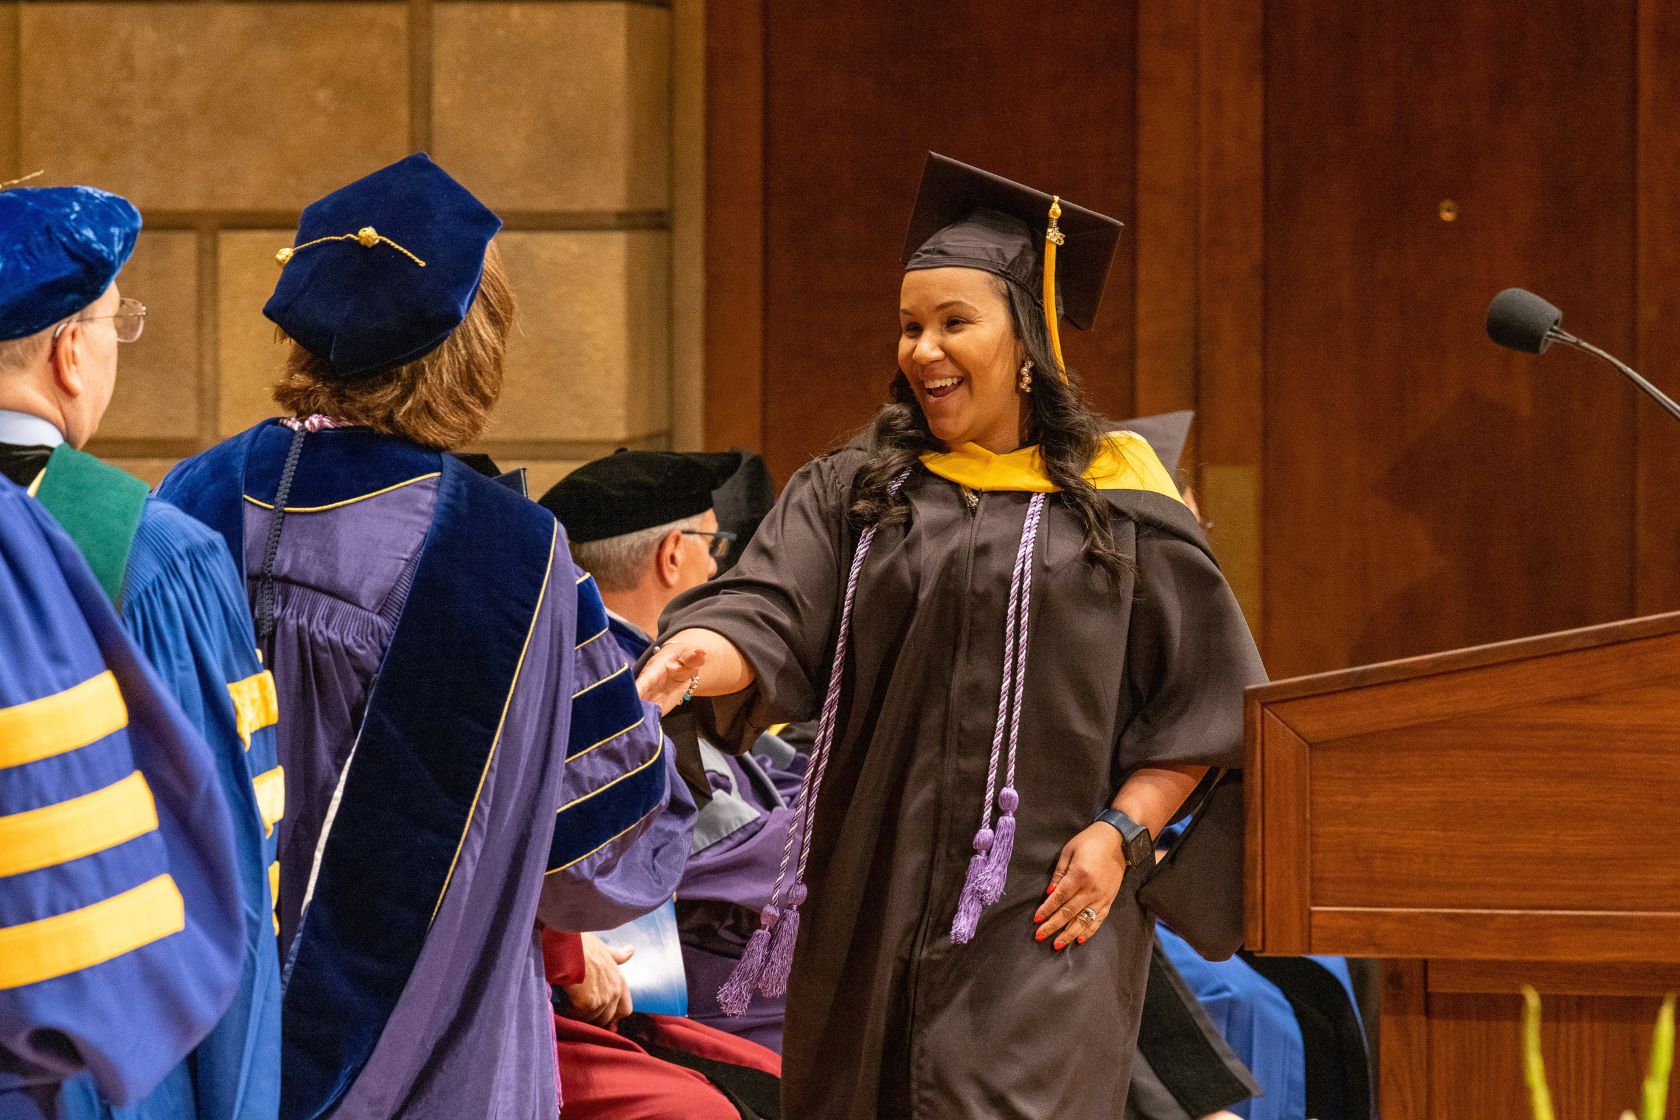 Evelyn Santos shakes hands with Dean Lisa Kitko at graduation.